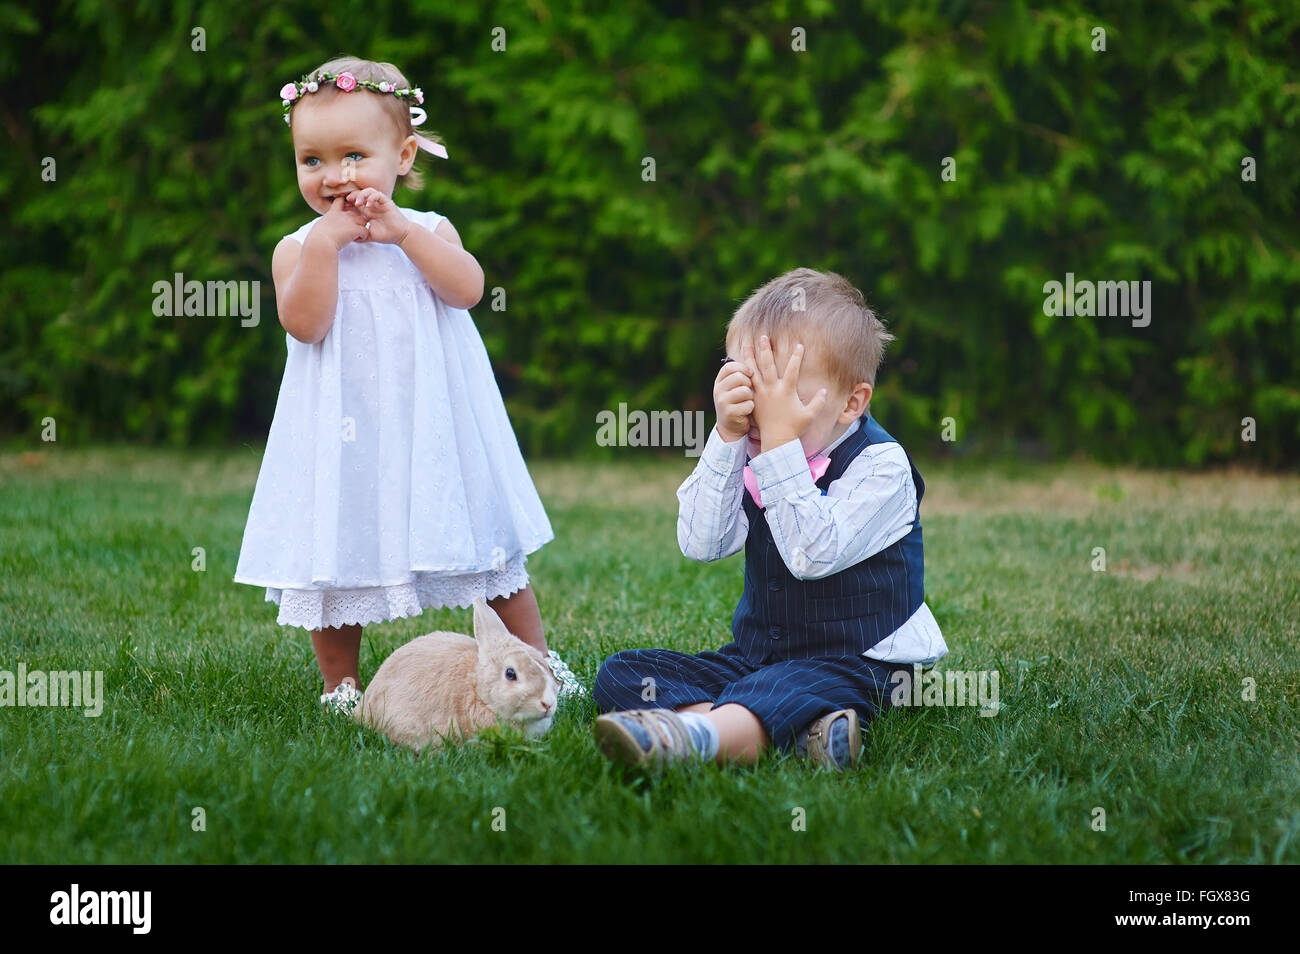 little boy with the girl and rabbit playing in the grass Stock Photo